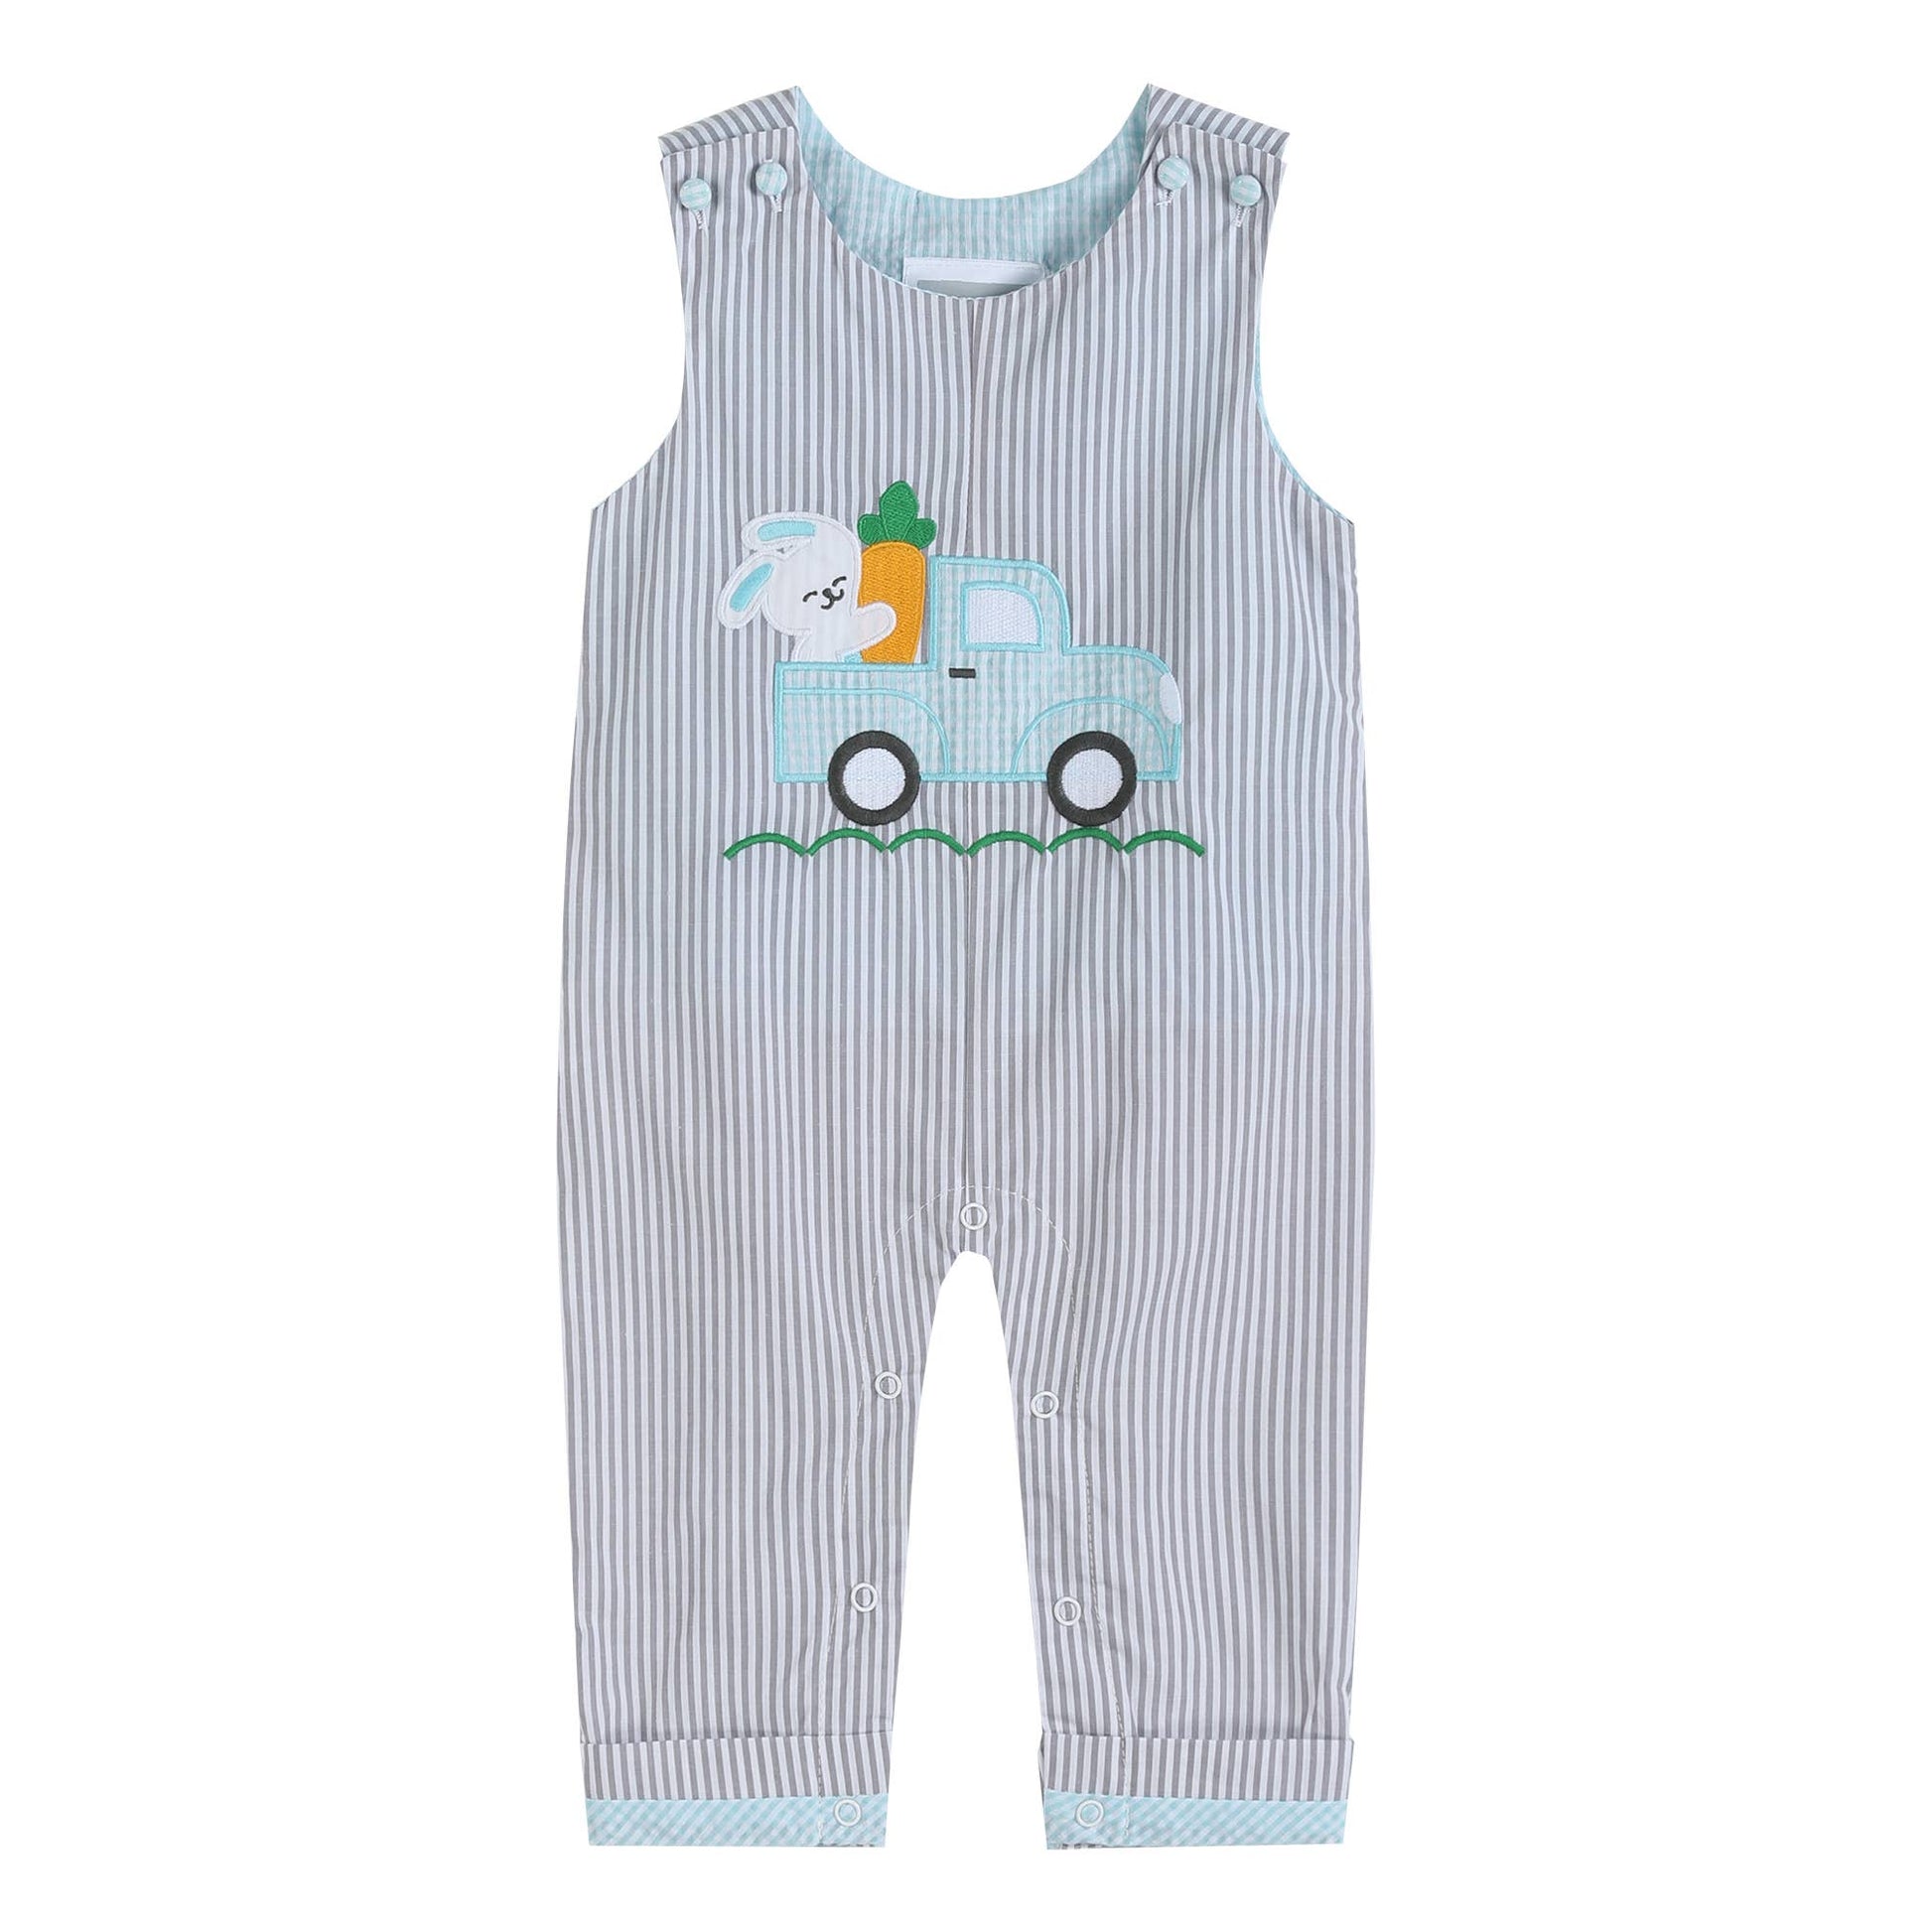 This adorable baby boy's romper features cute details, such as a Gray Striped Easter Bunny Truck Applique Overalls: 12-18M made from soft cotton fabric, by Lil Cactus.